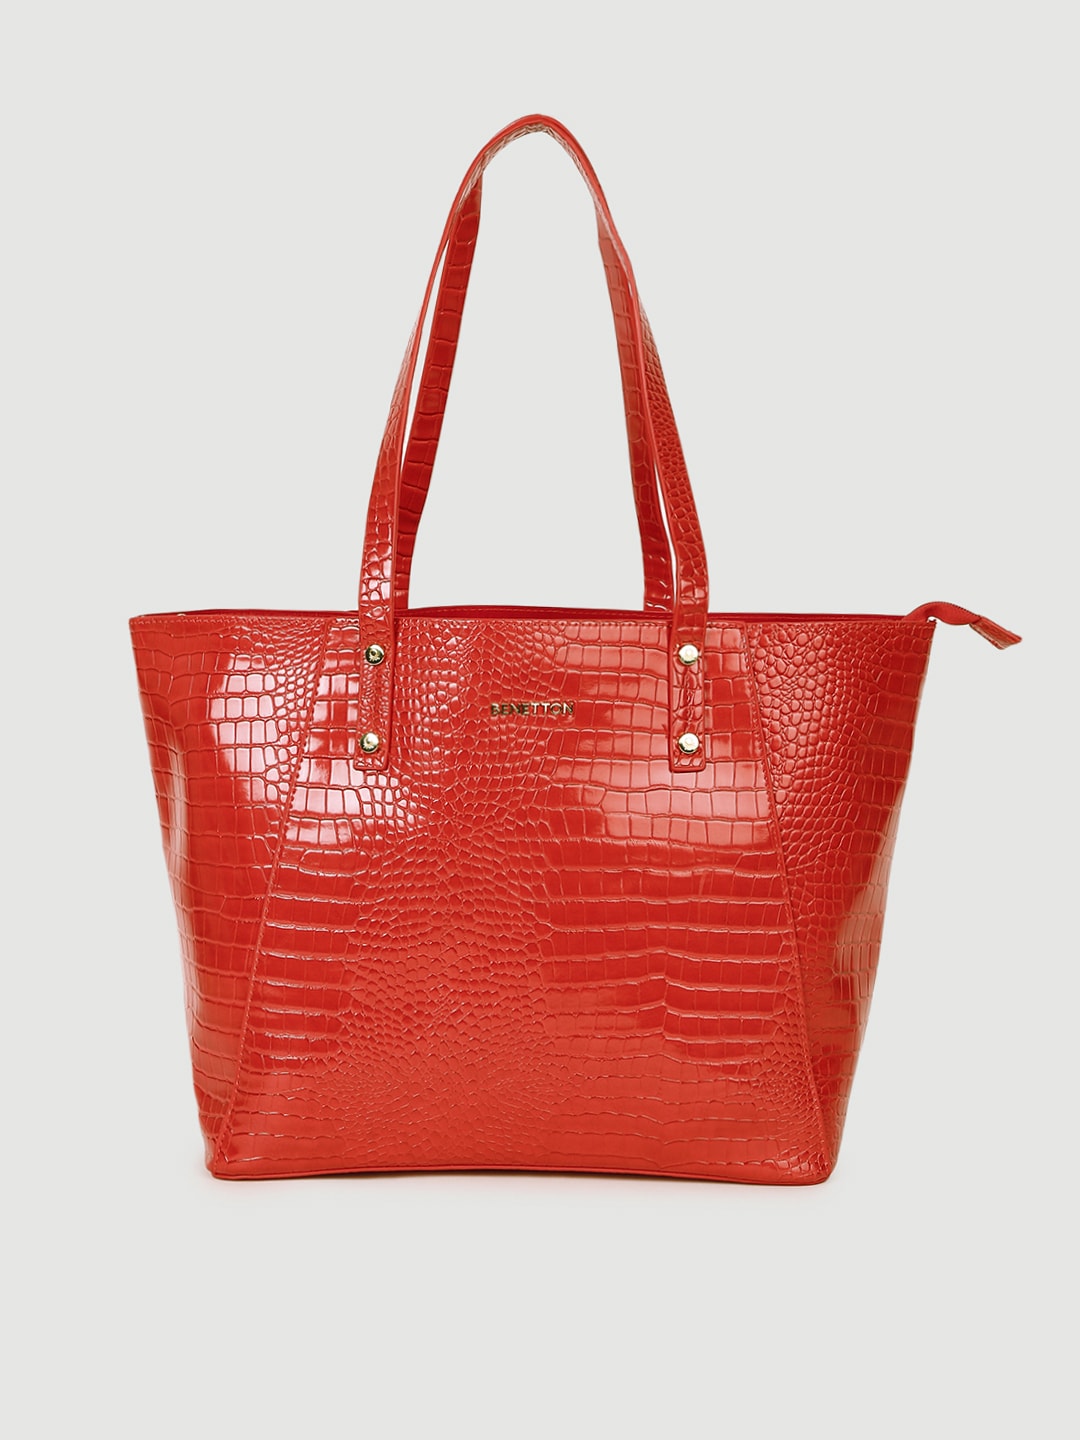 United Colors of Benetton Red Textured Shoulder Bag Price in India